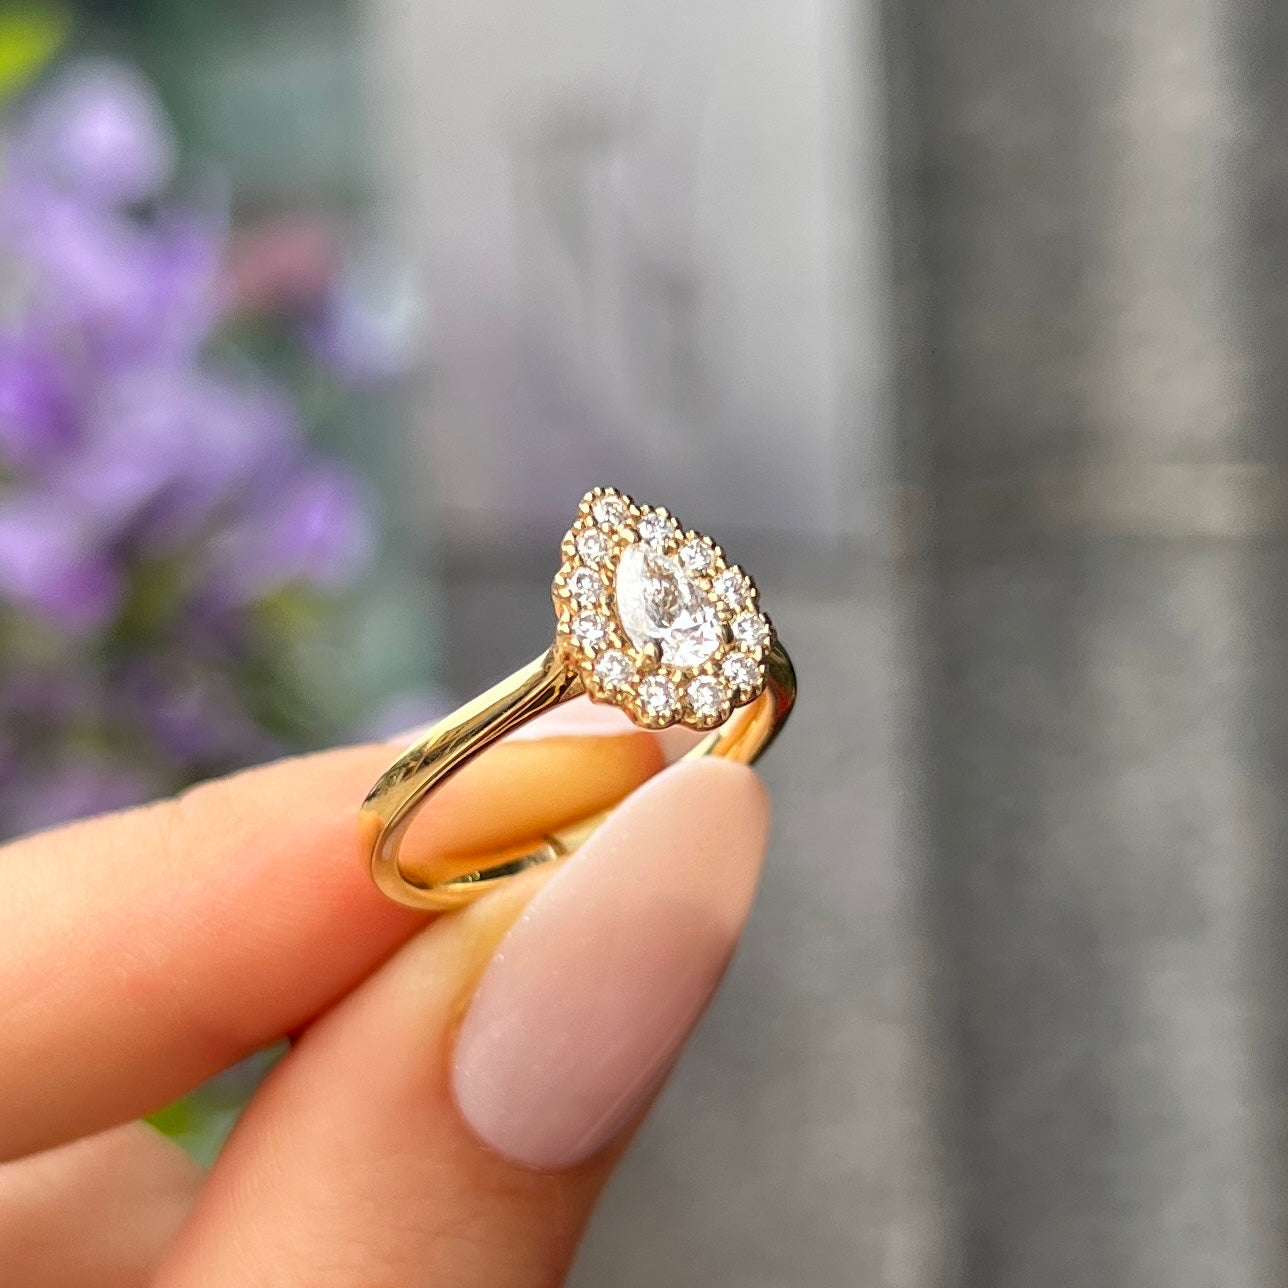 18ct Yellow Gold Pear Shaped Diamond Ring - Size M